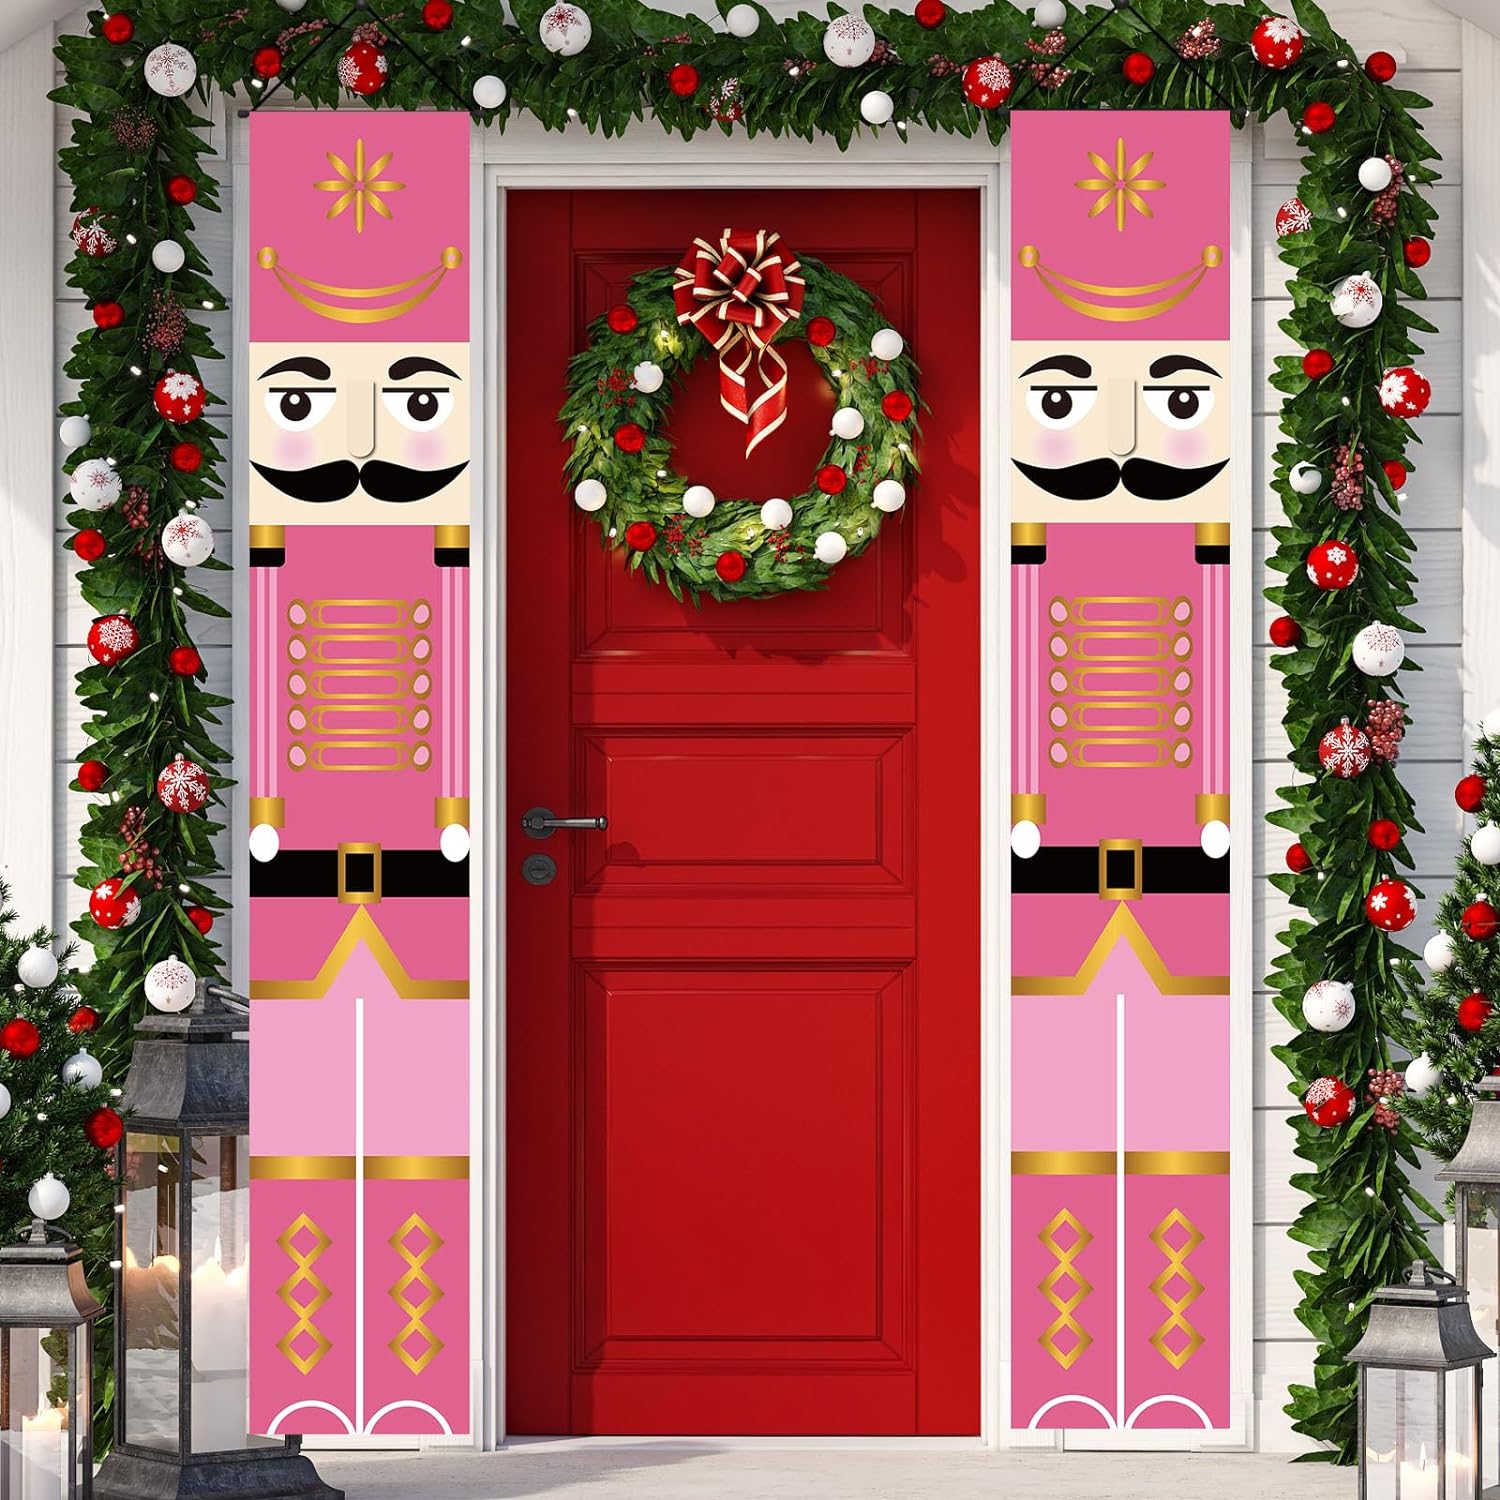 Great Choice Products Pink Nutcracker Christmas Decorations Pink Nutcracker Porch Banner Outdoor Christmas Nutcracker Decorations And Supplies For …